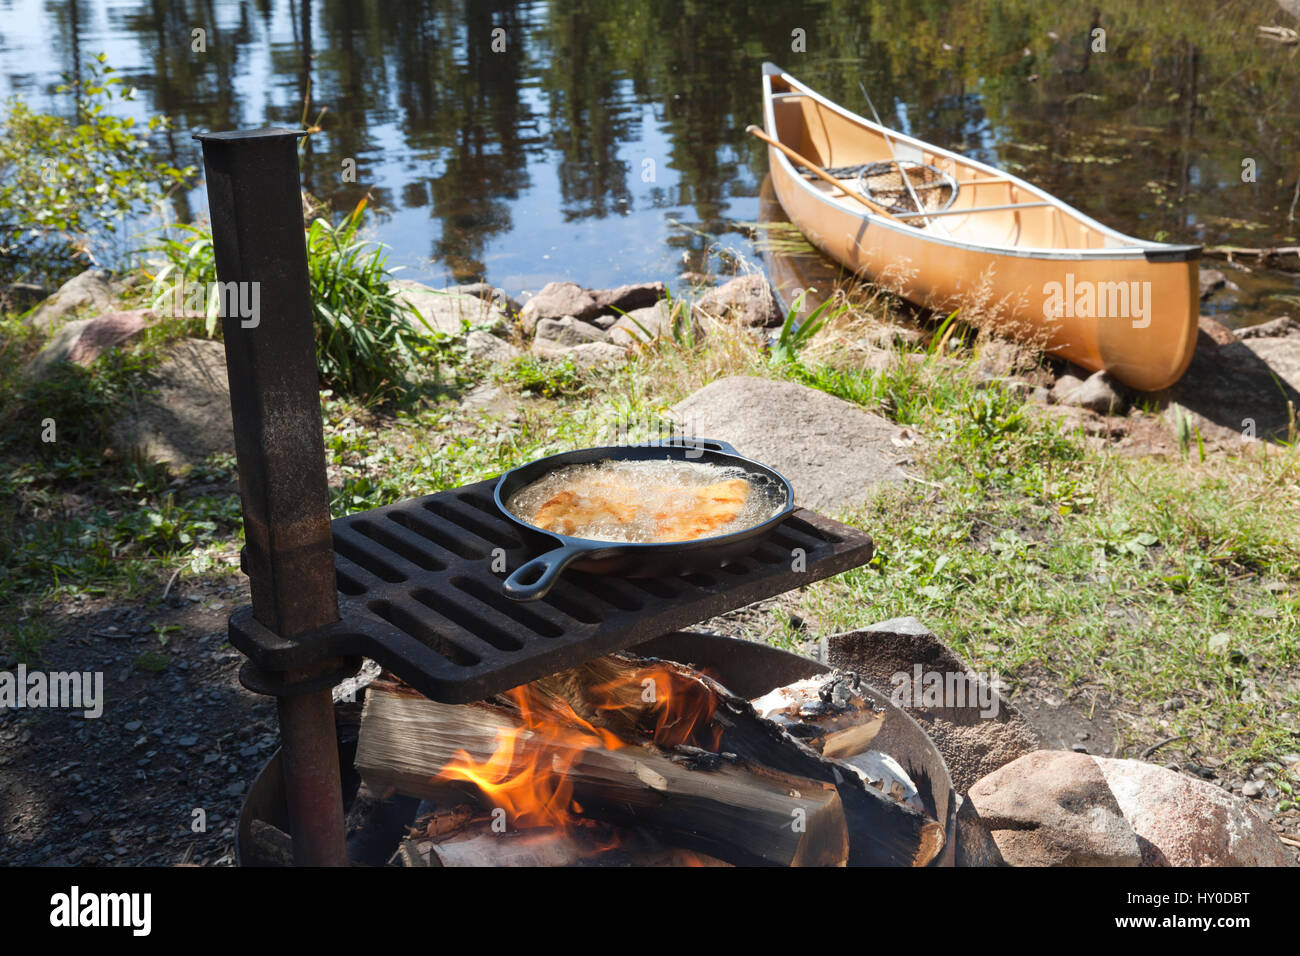 Fish cooking in a frying pan over an open fire with a canoe and northern Minnesota lake in the background Stock Photo